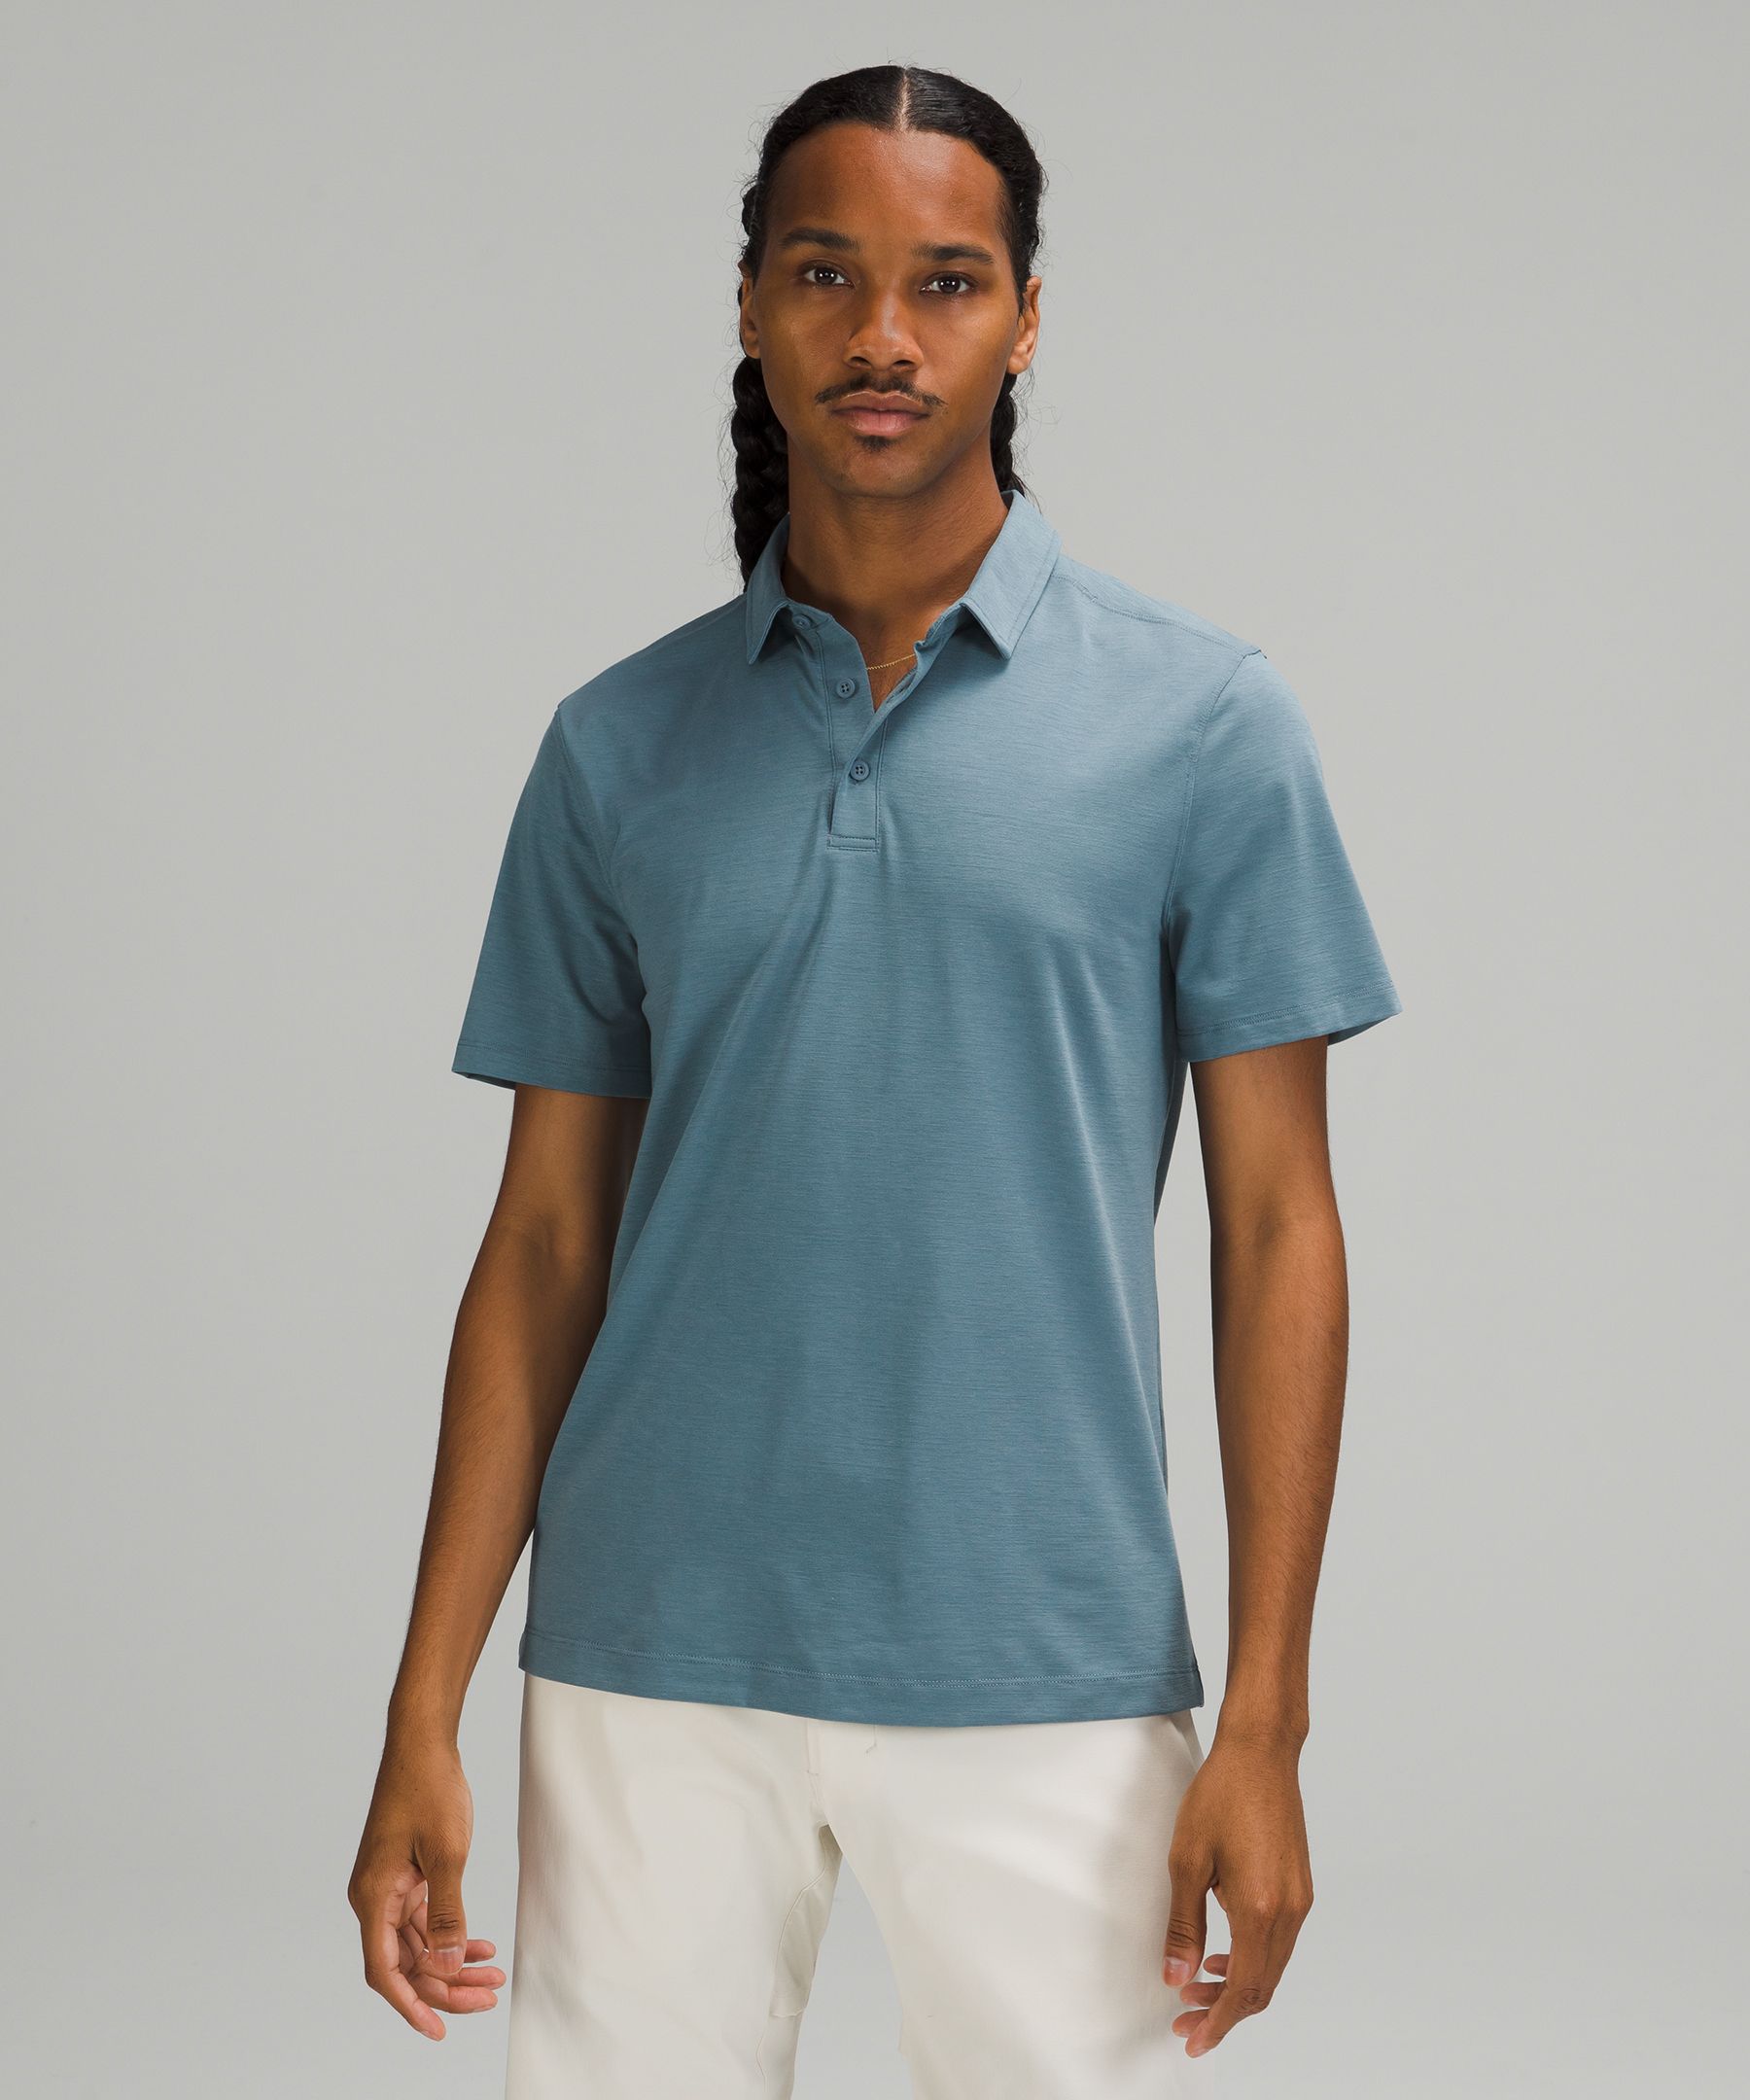 Lululemon Evolution Polo Size M * Silverescent Willow Green WLWG